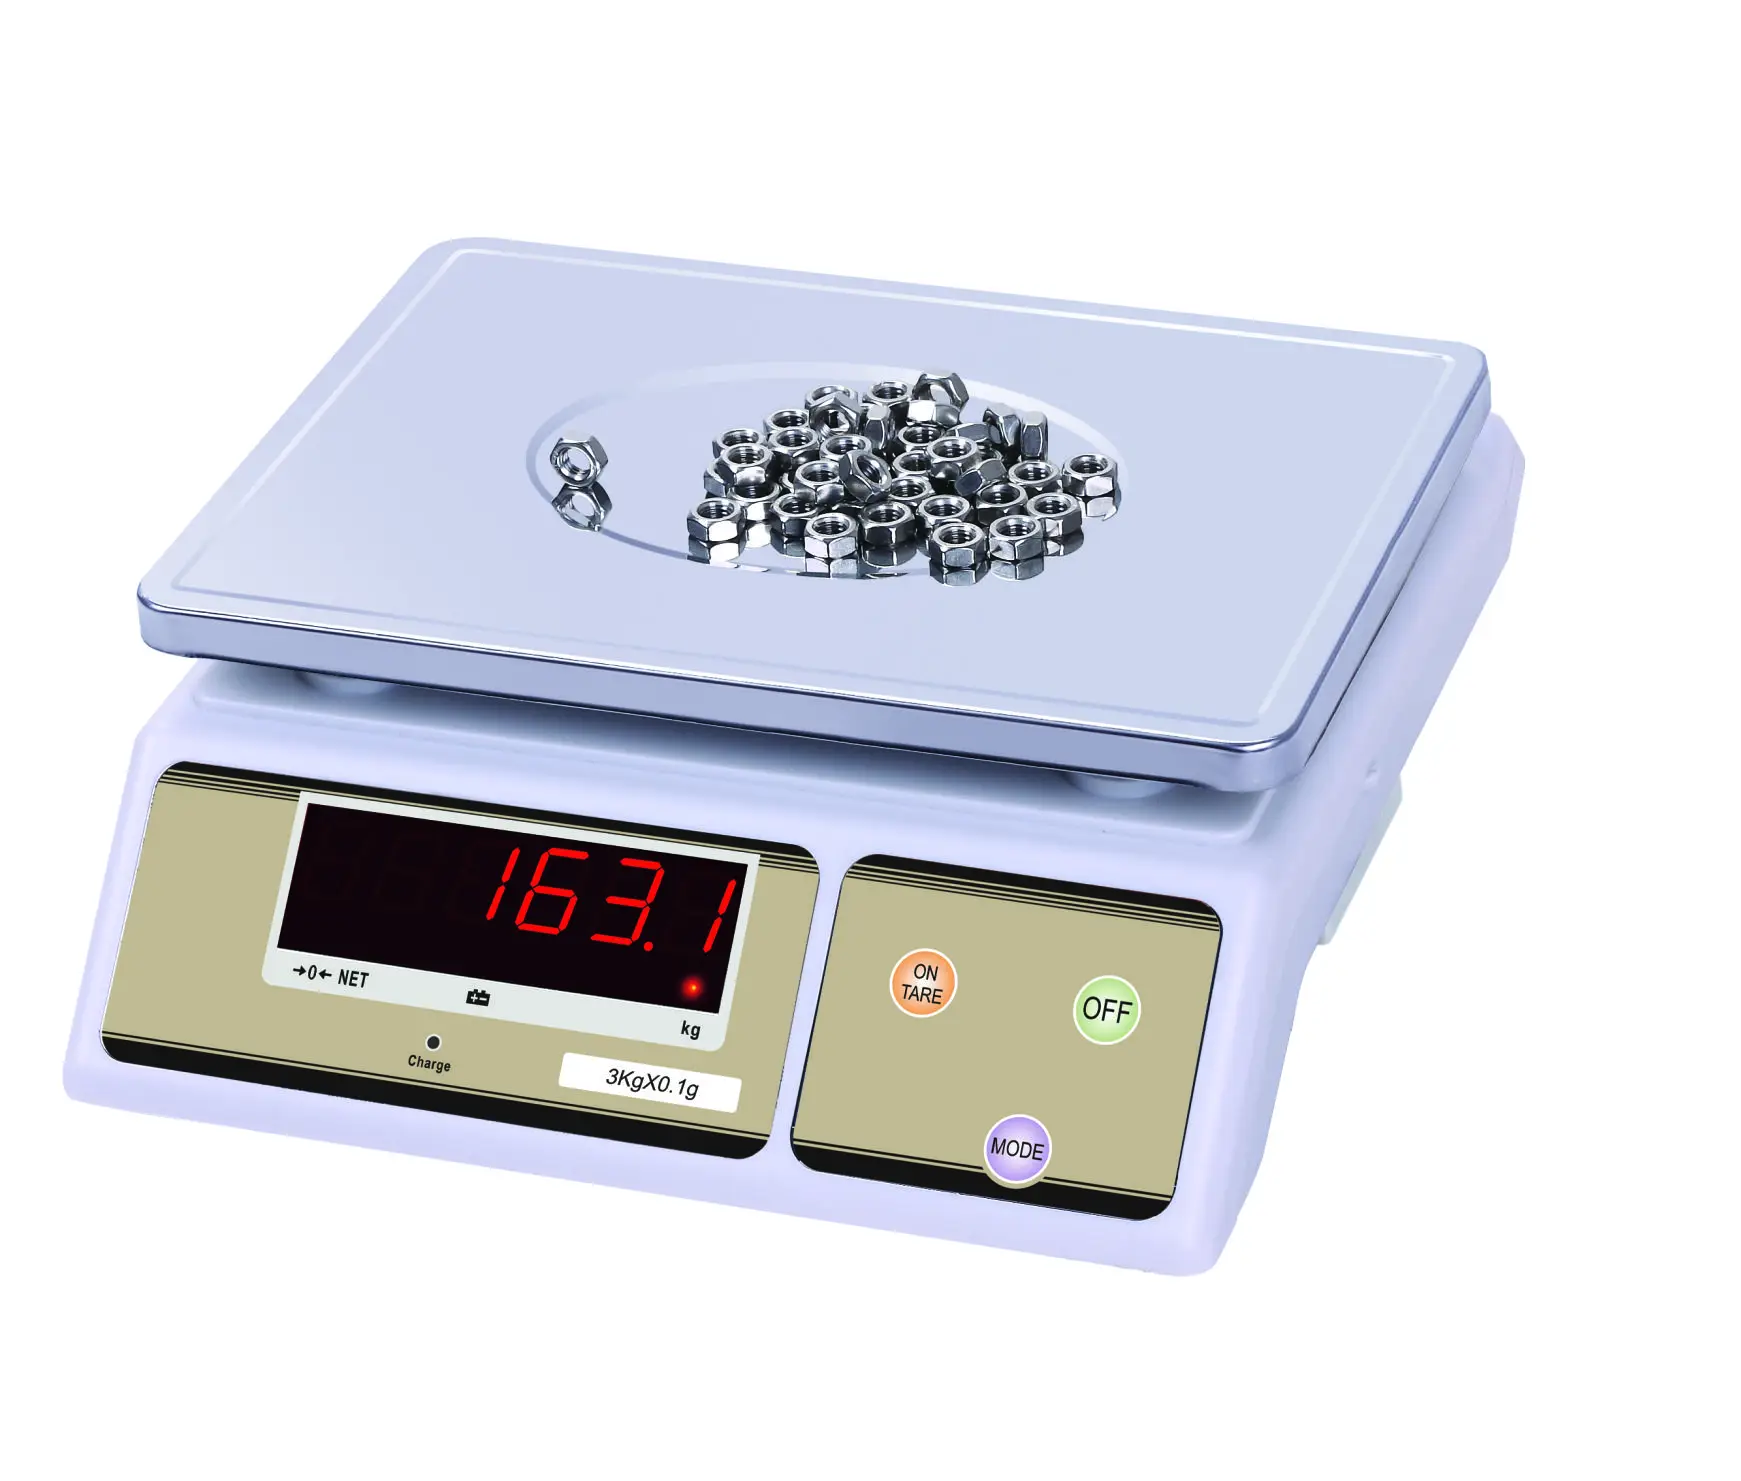 Digital Weighing  Scale kitchen scale3Kg 0.1g 6Kg0.2g 15Kg0.5g 30kg1gFood Scales Digital Weight Gram and Oz Scale with LCD/ Tare